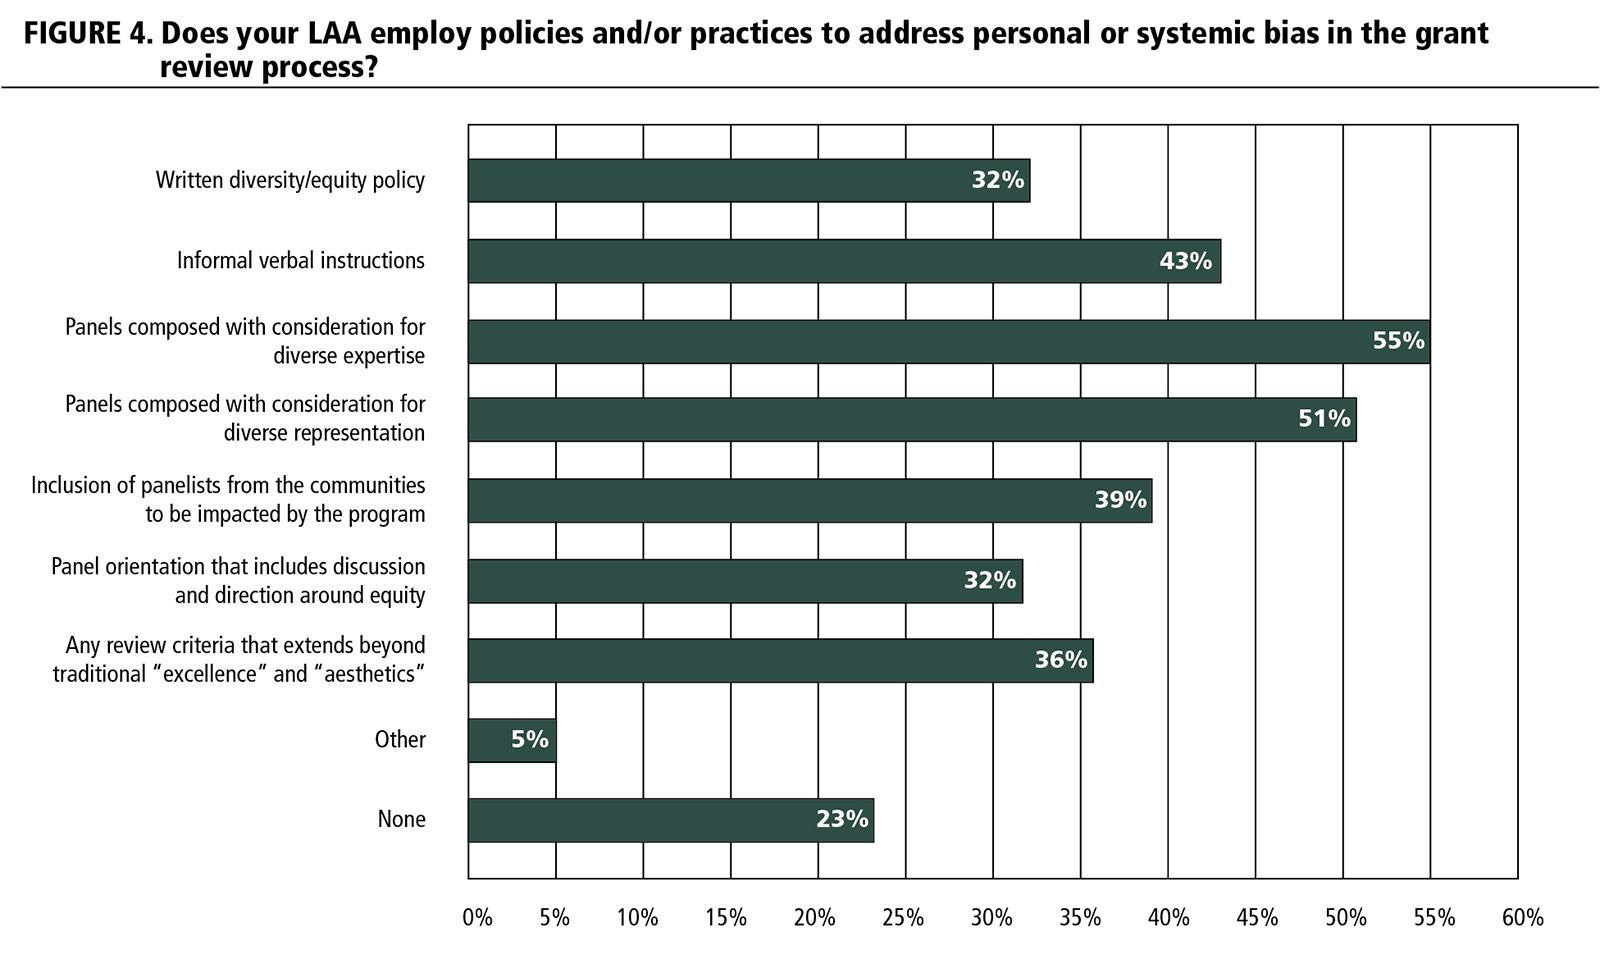 FIGURE 4. Does your LAA employ policies and/or practices to address personal or systemic bias in the grant review process?